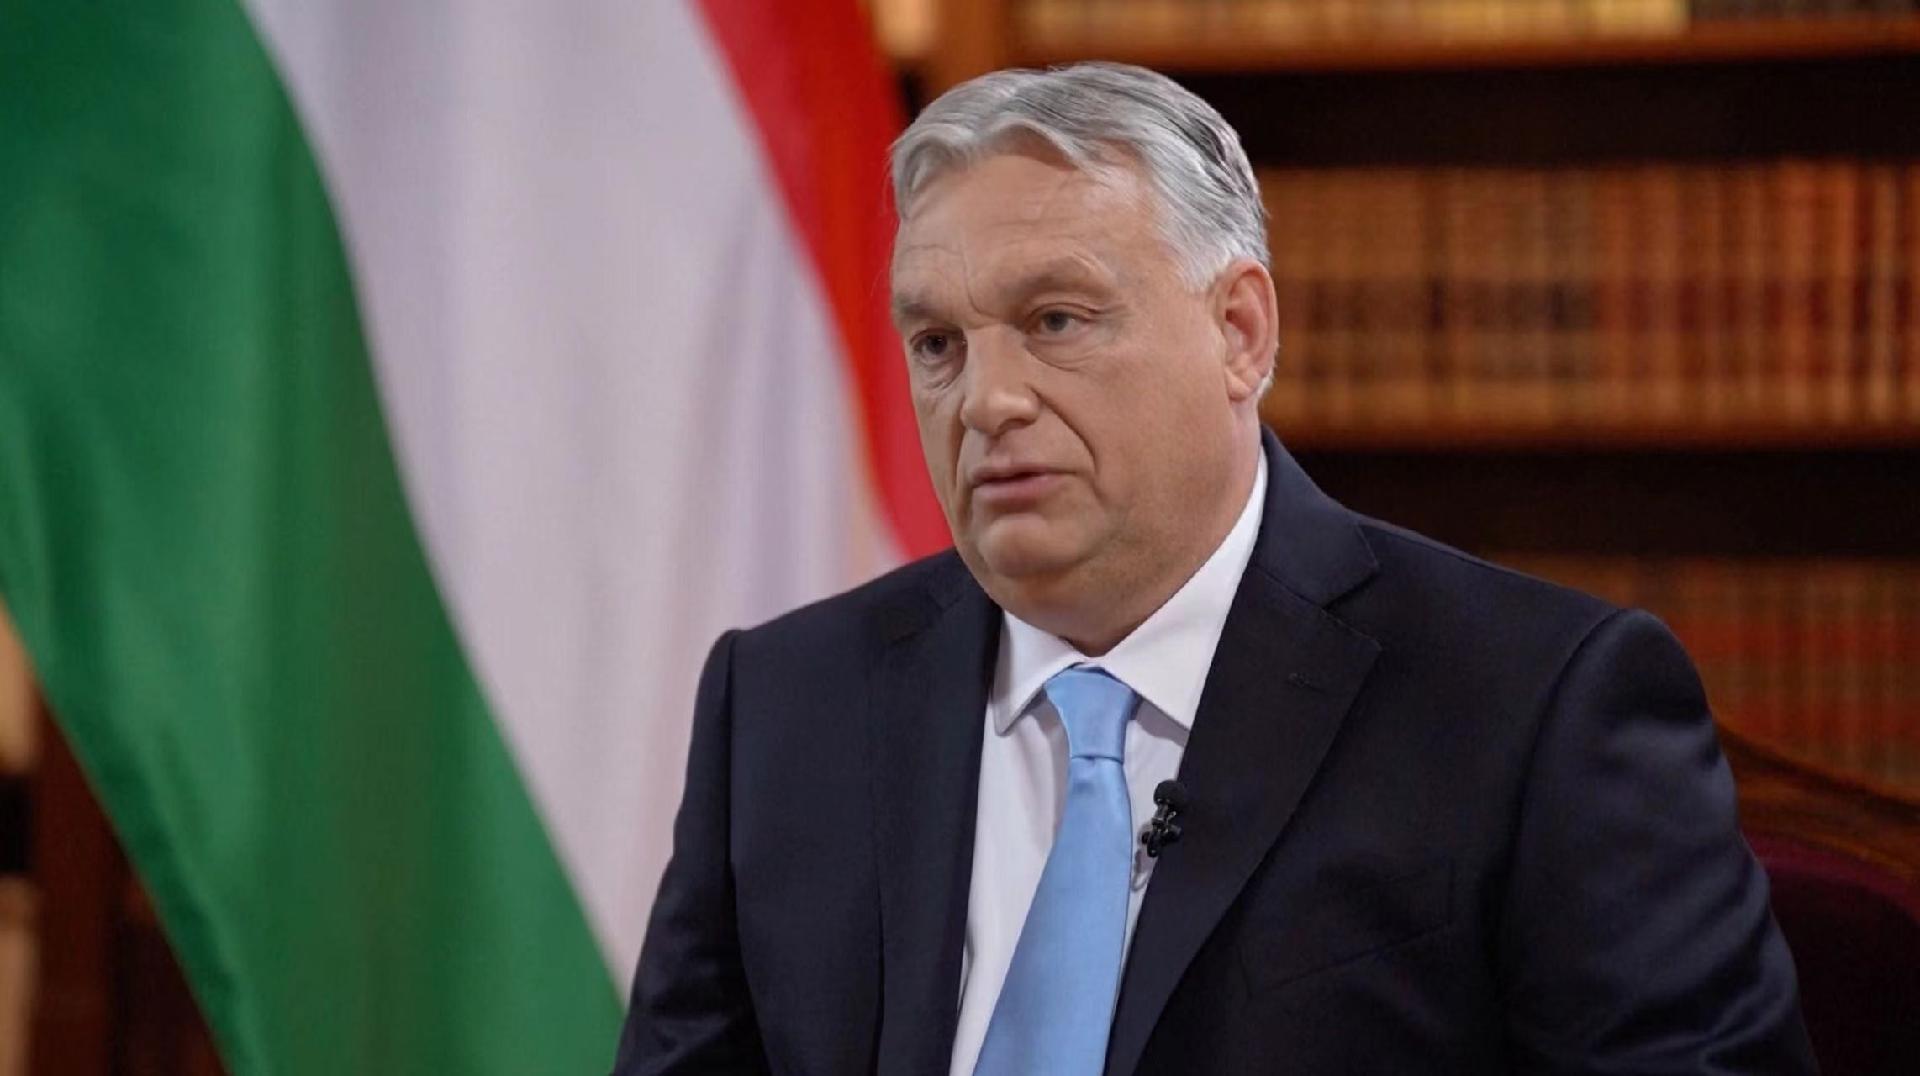 China’s development offer more opportunities for Hungary, world [Video]